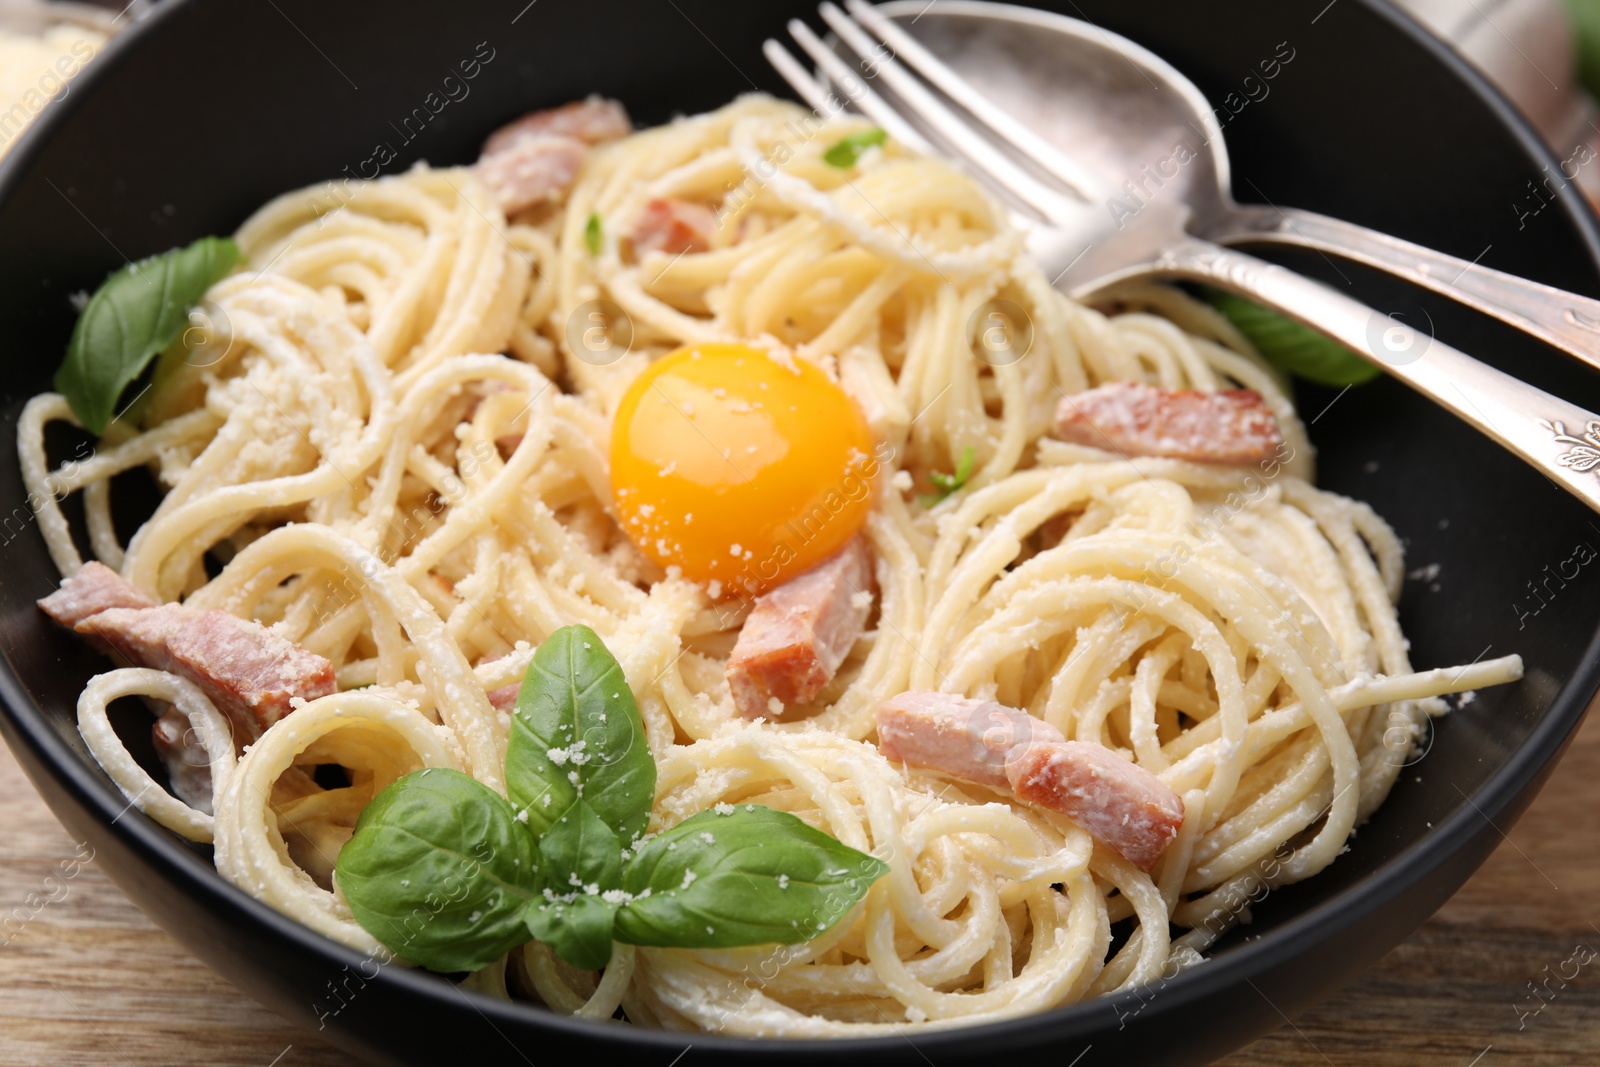 Photo of Bowl of delicious pasta Carbonara with egg yolk and cutlery on table, closeup